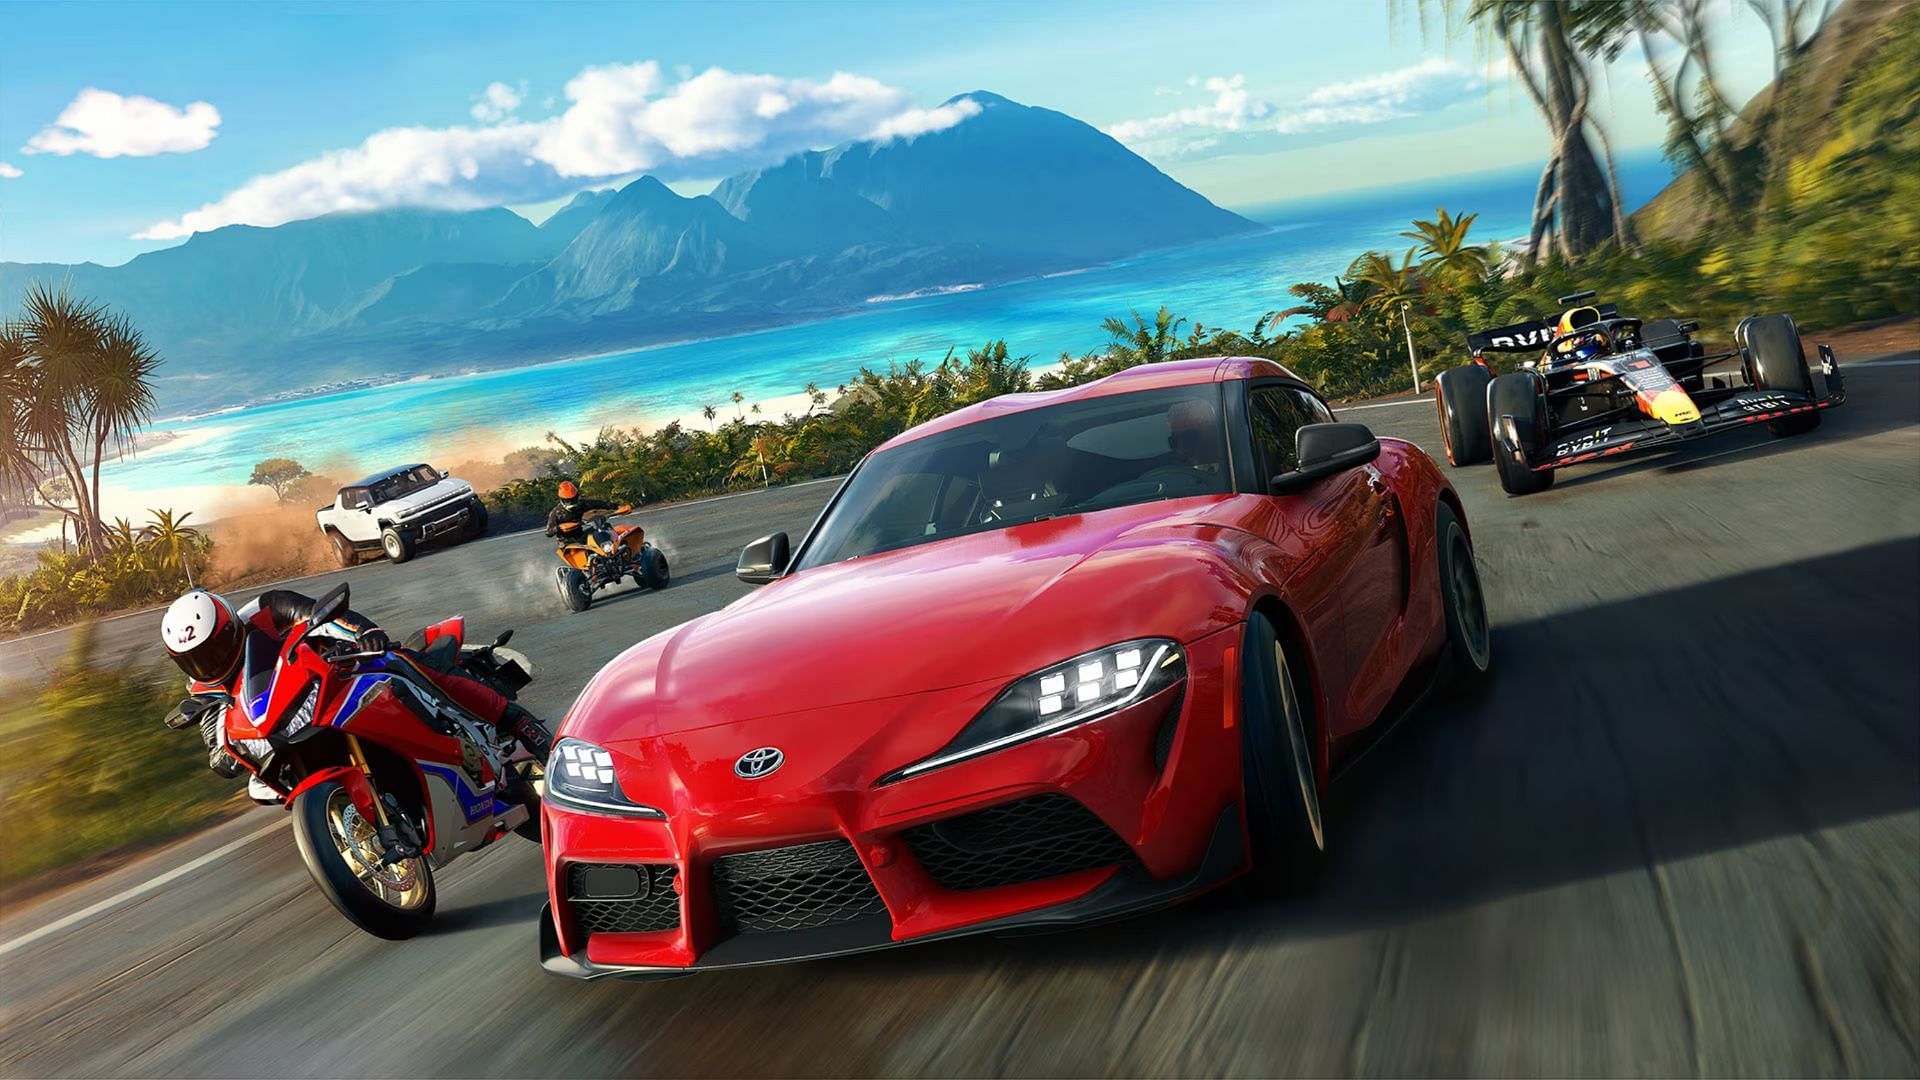 Is The Crew Motorfest on Game Pass? How to Get the Game Pass for The Crew  Motorfest? - News